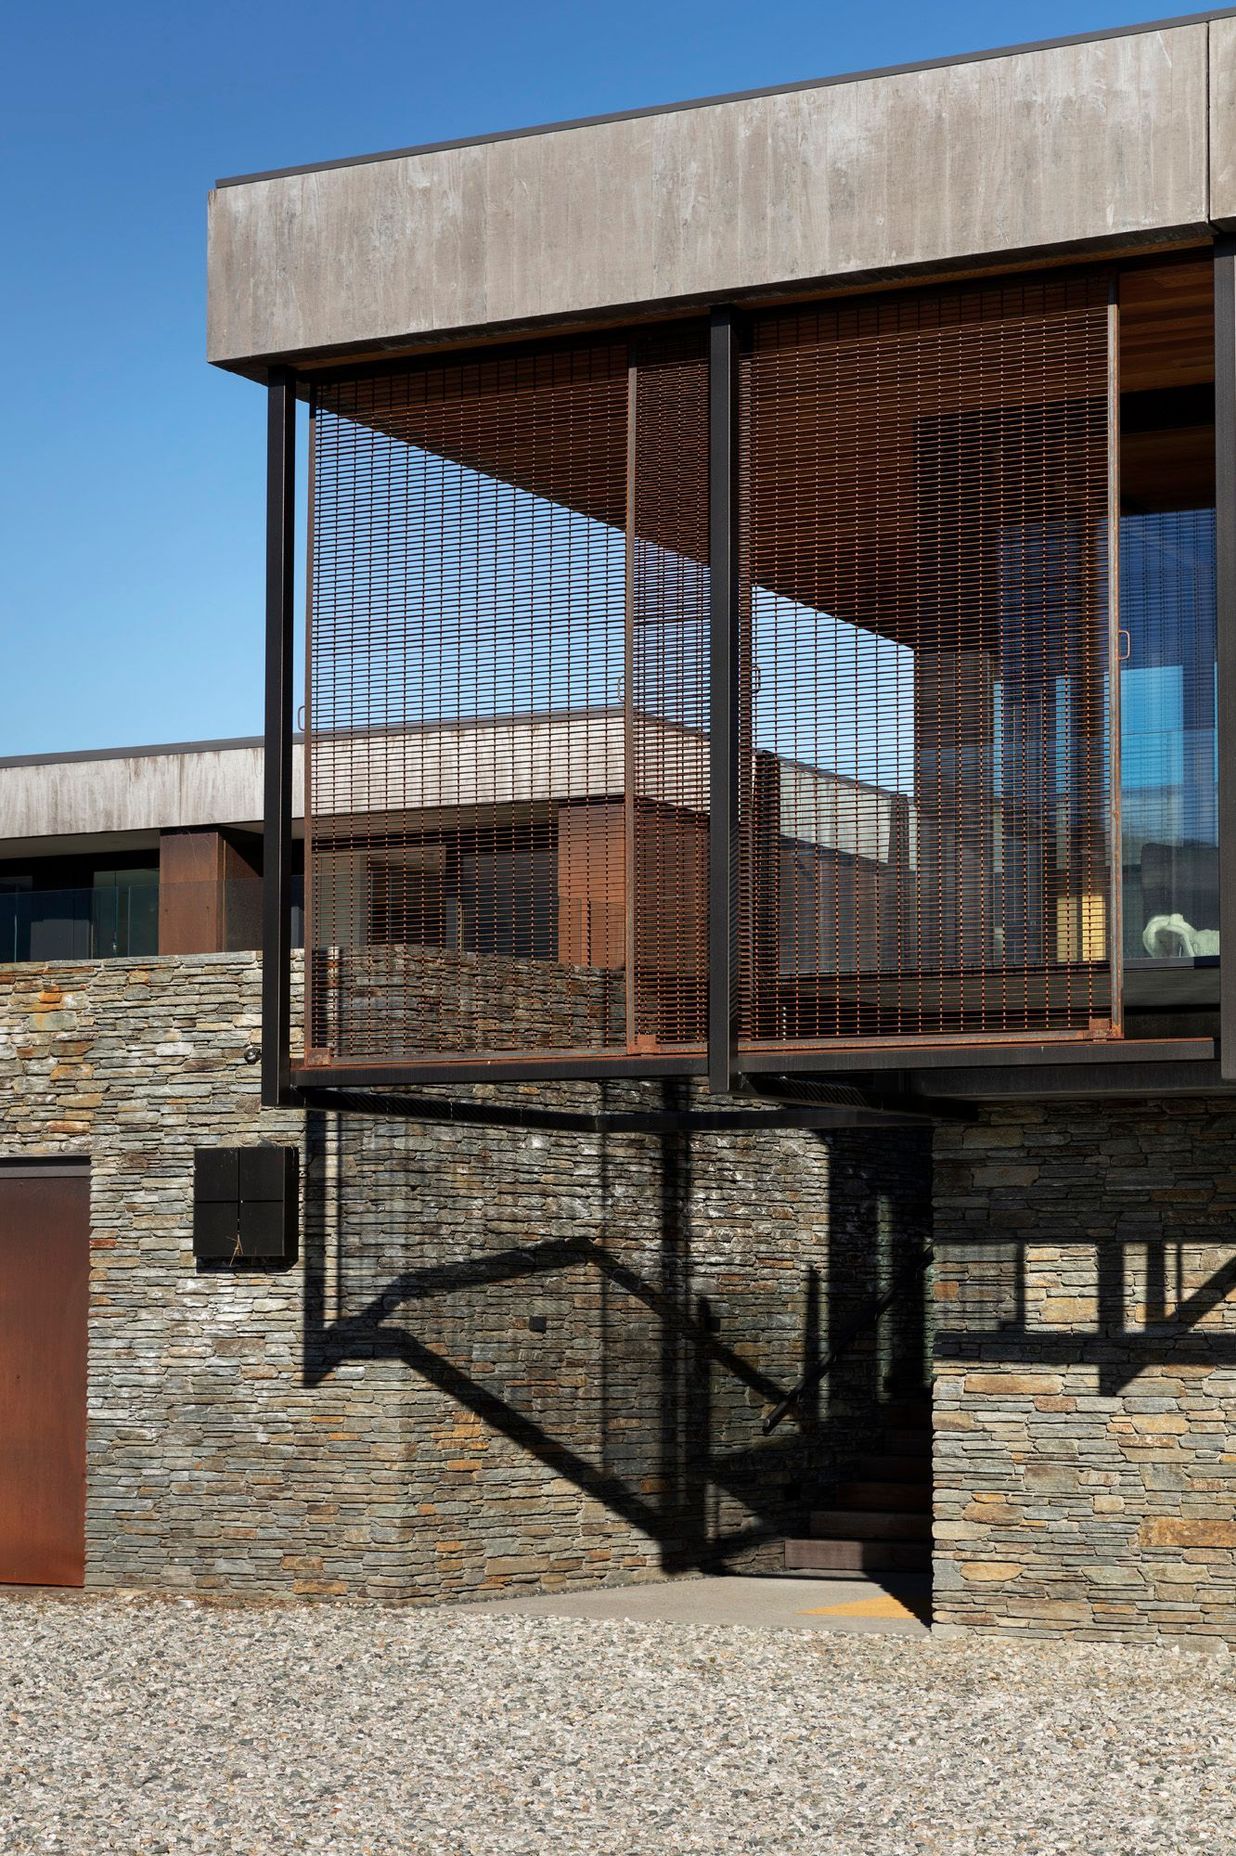 Rusty steel caging and schist stone take inspiration from buildings fo the region.